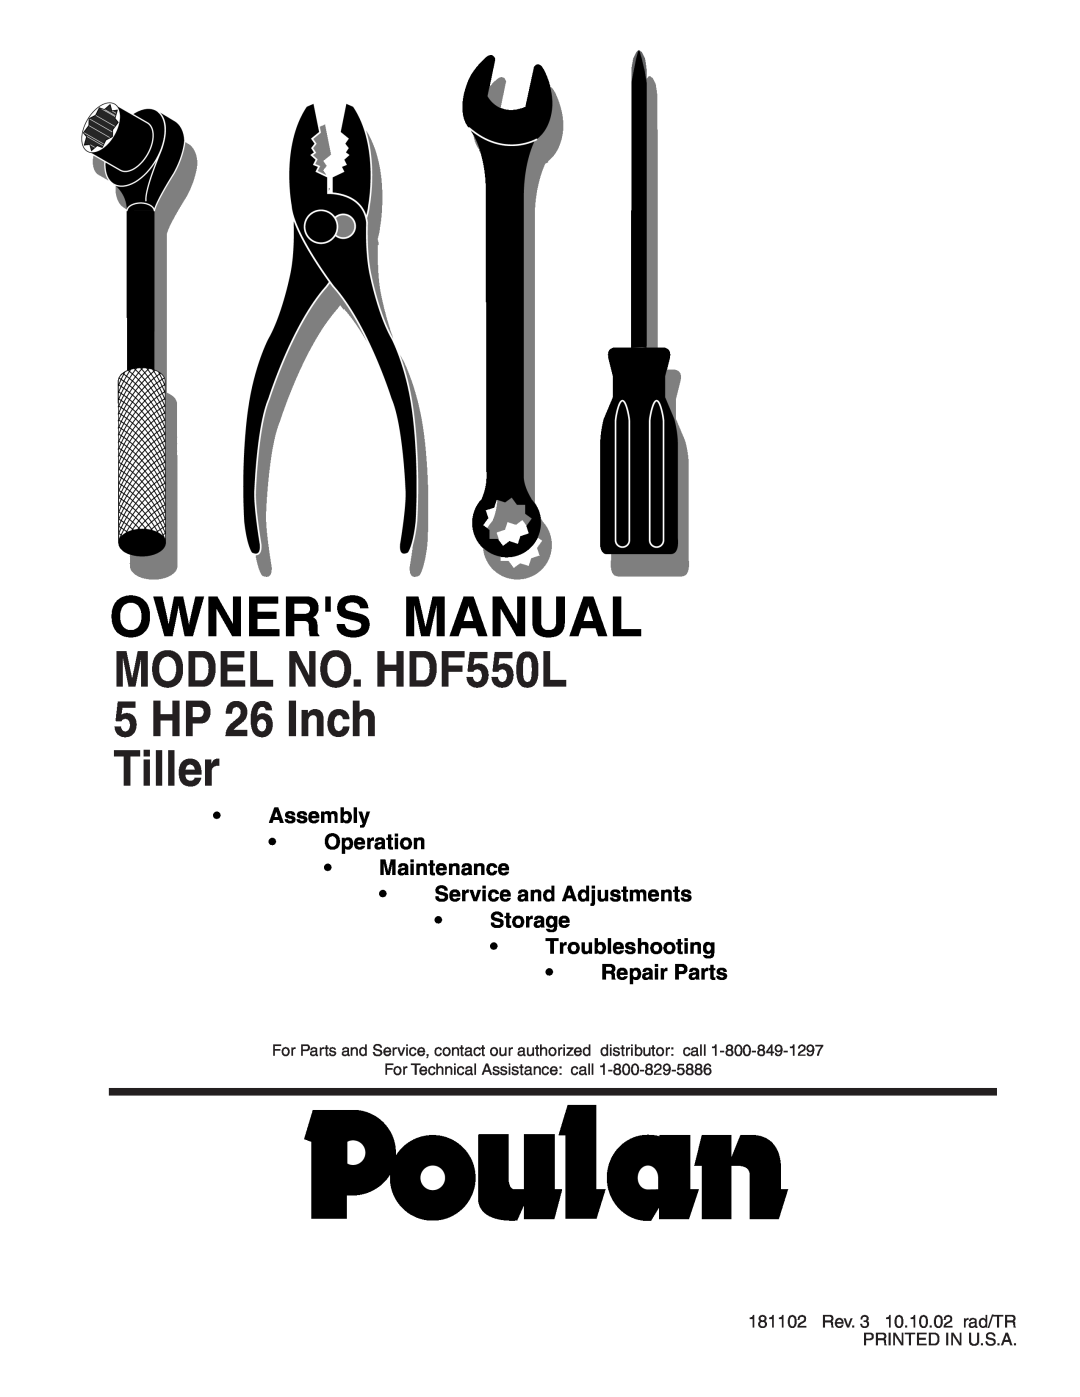 Poulan owner manual MODEL NO. HDF550L 5 HP 26 Inch Tiller, Assembly Operation Maintenance, Troubleshooting Repair Parts 